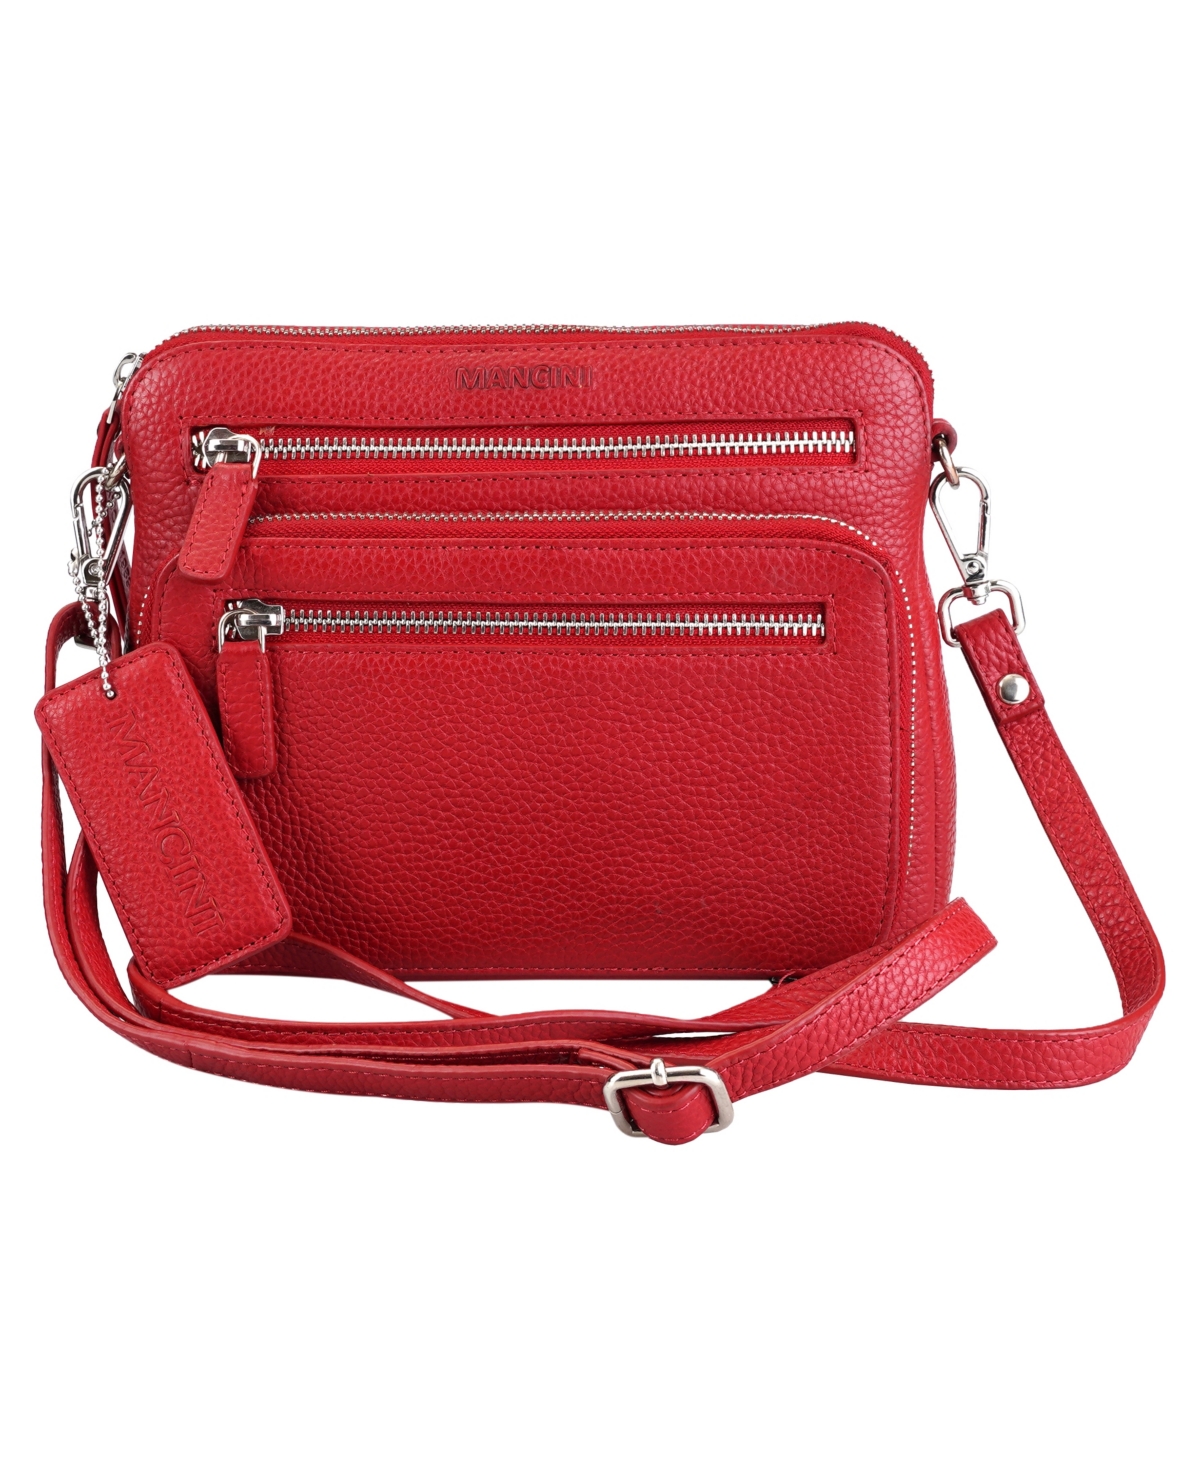 Mancini Pebbled Collection Valerie Leather Mini Crossbody Bag In Red